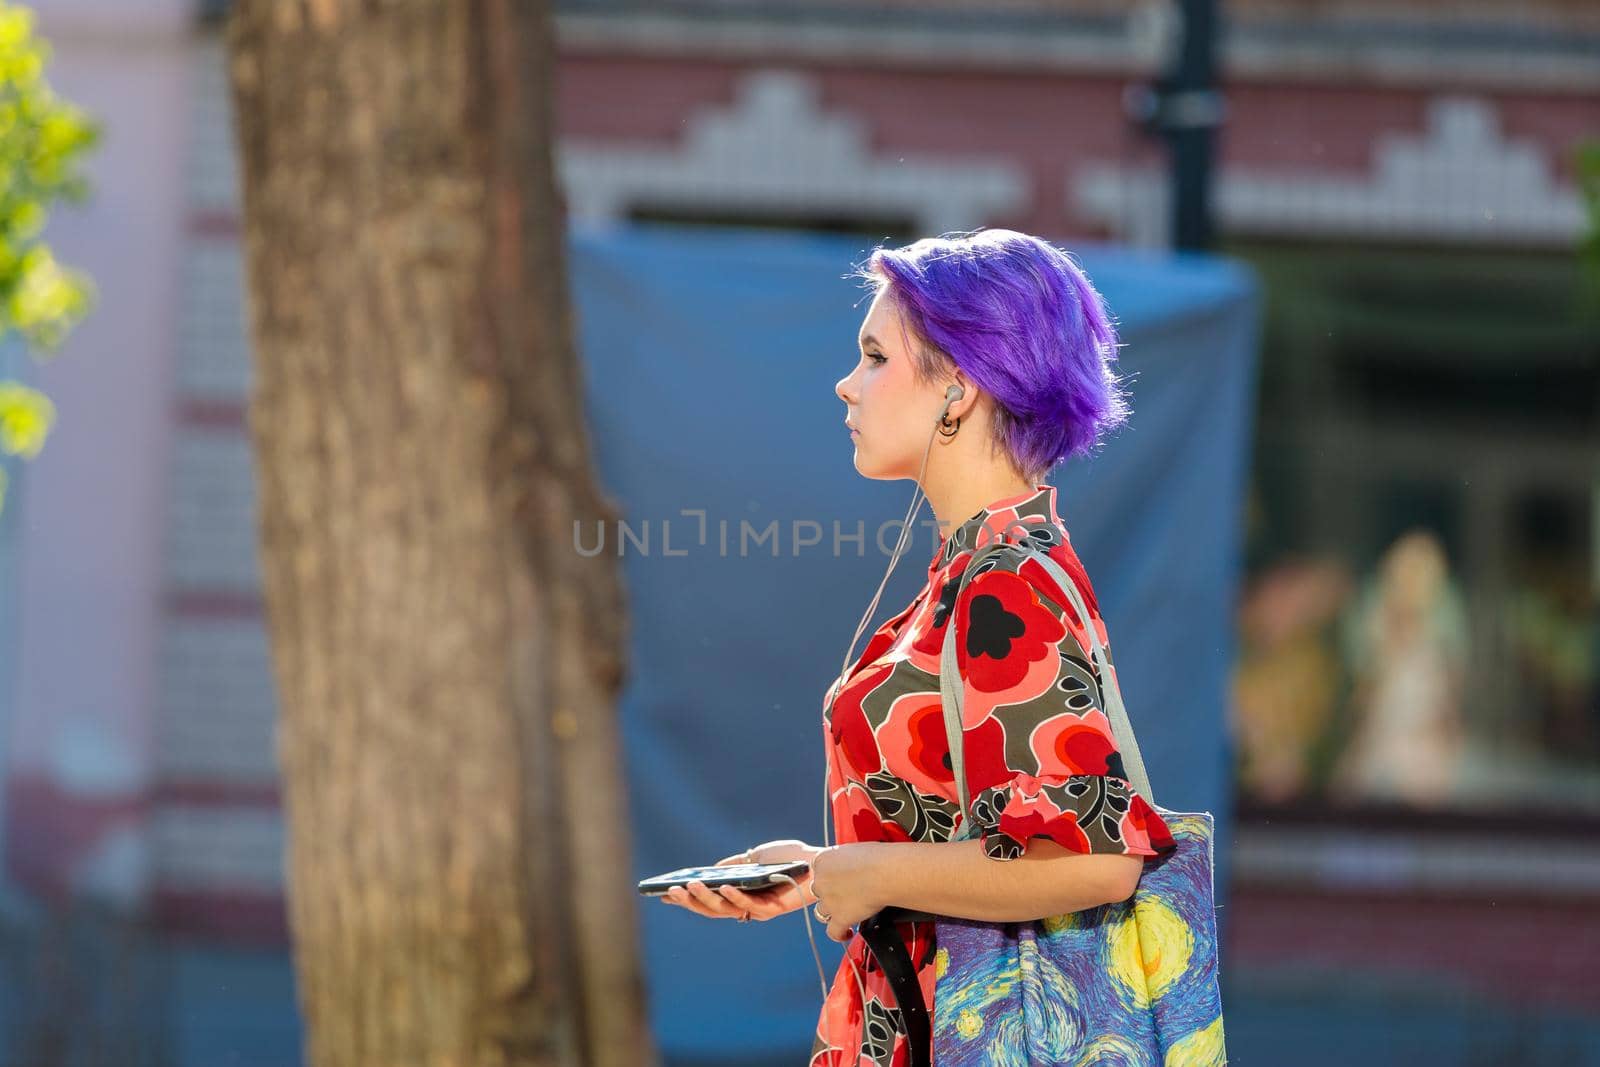 A girl walks along a city street with purple hair by Yurich32